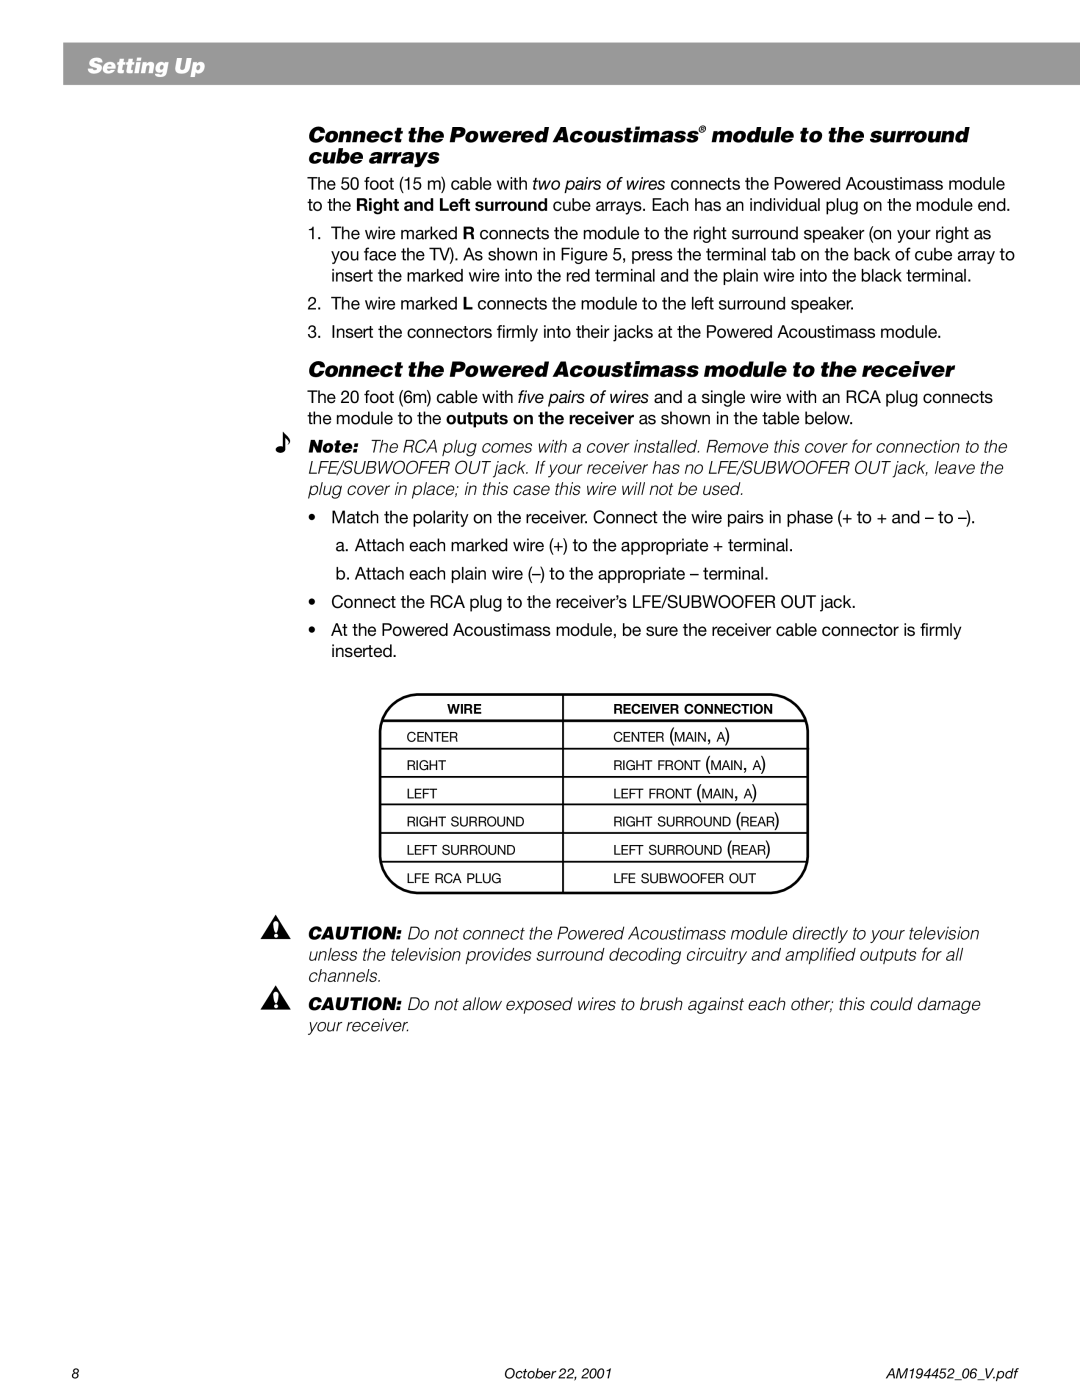 Bose Acoustimass manual Setting Up, October, Wire, Receiver Connection 